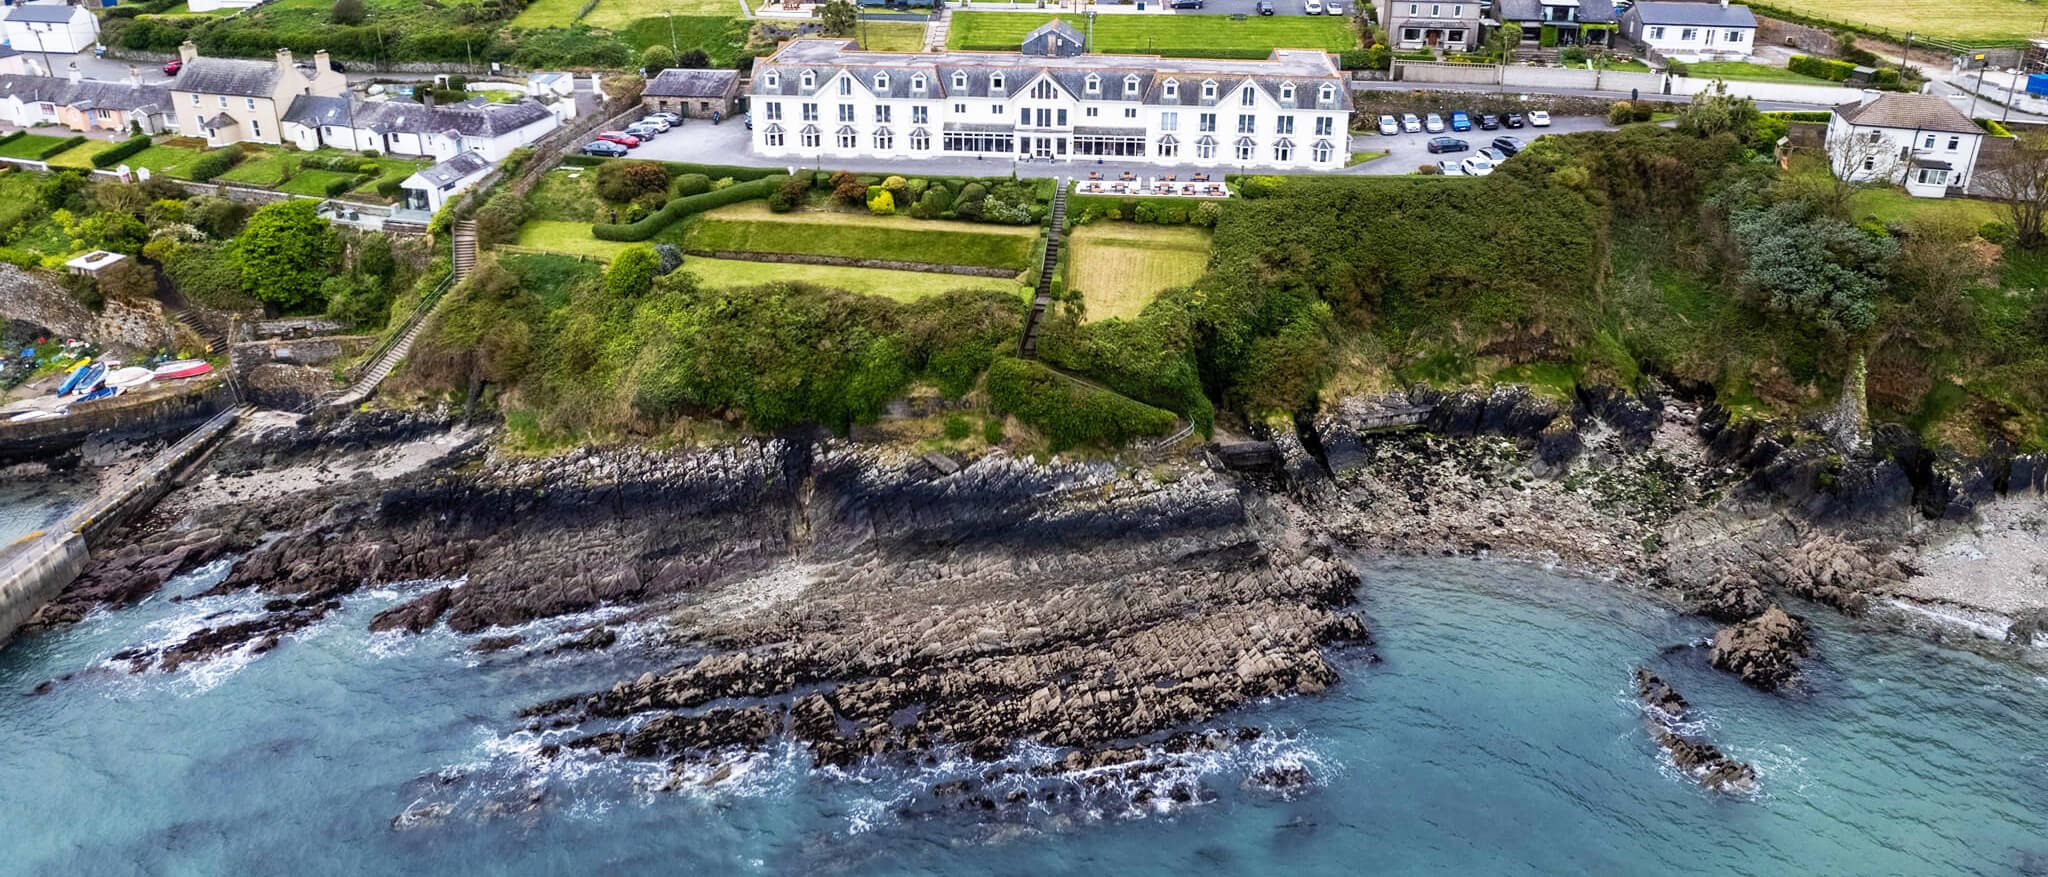 Aerial view of the Bayview Hotel in Ballycotton, Ireland